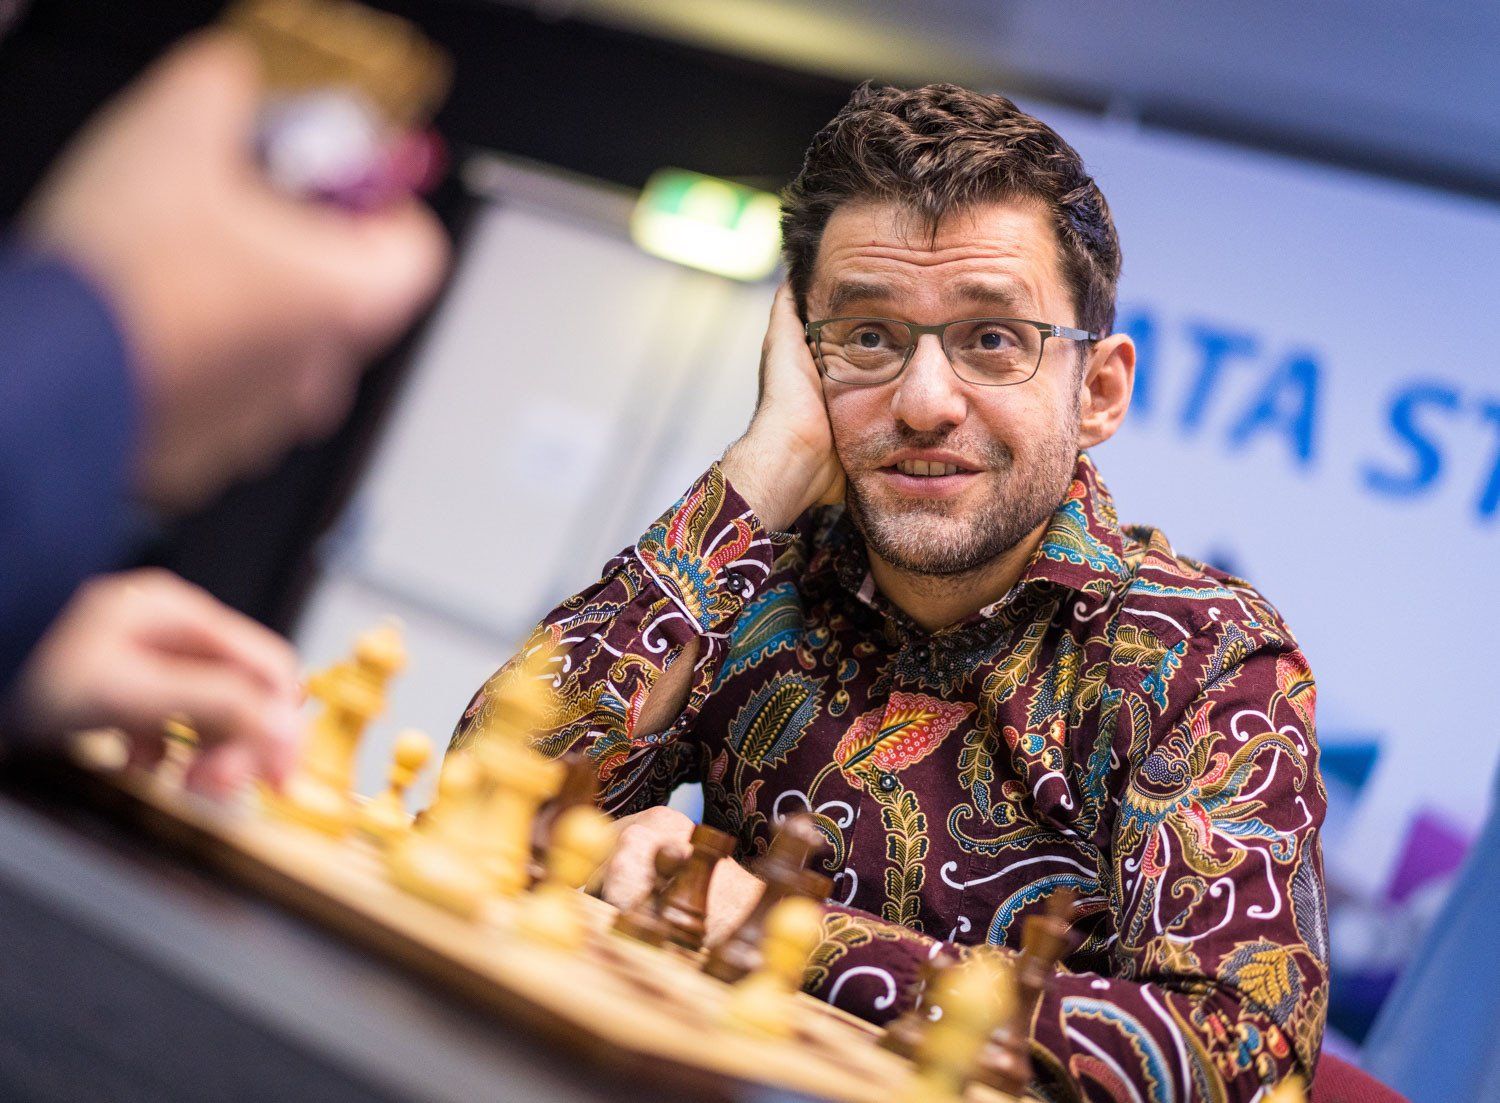 So Scores First Win, Caruana Joins Chase After Abdusattorov 